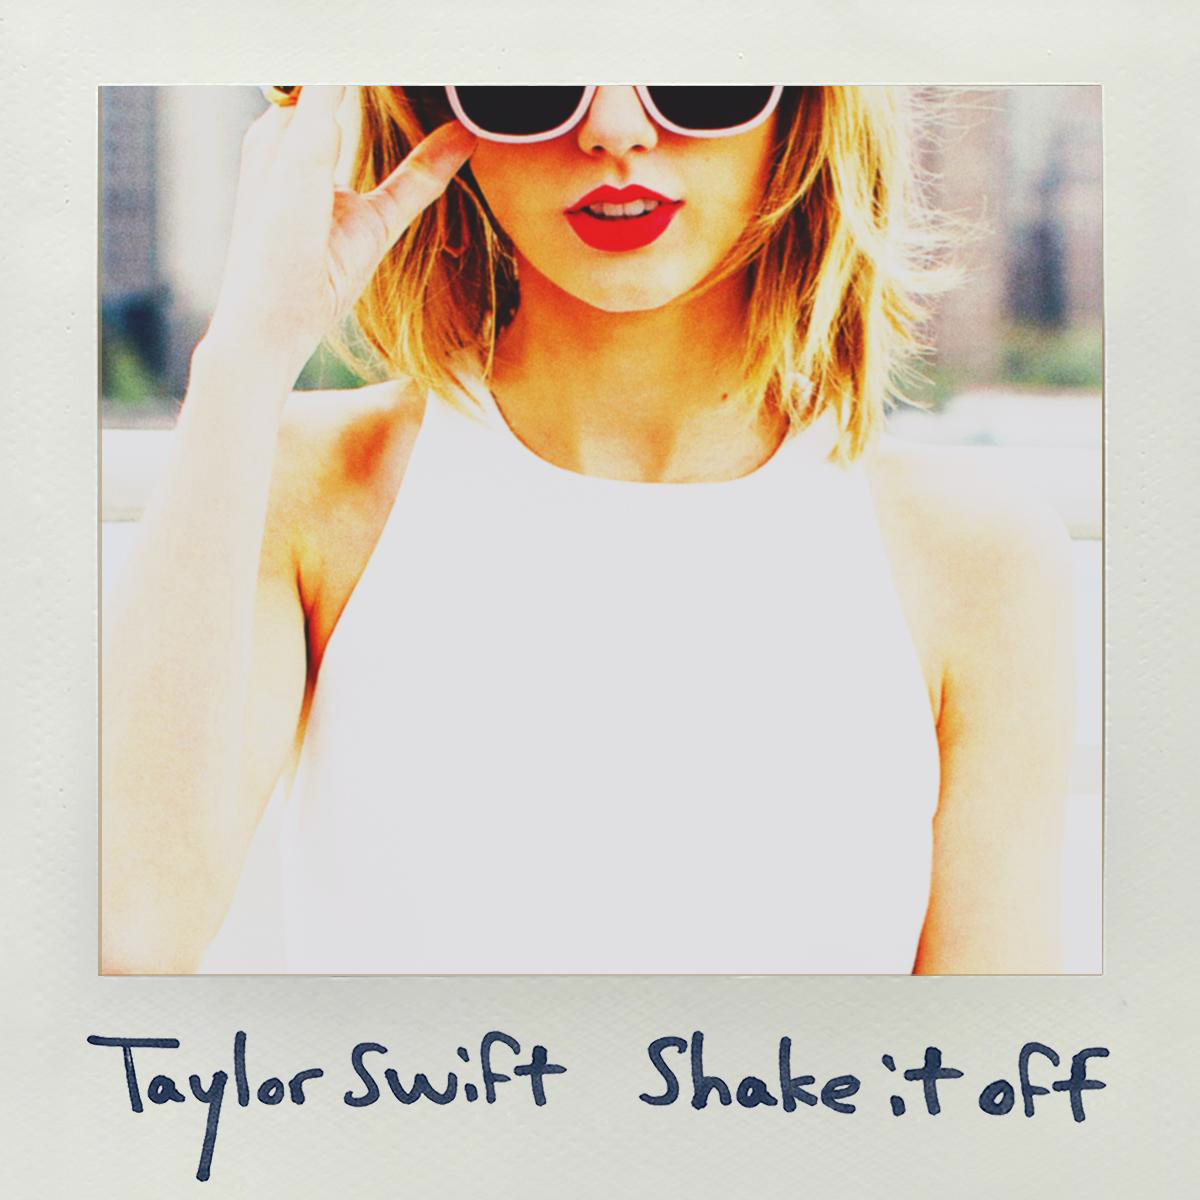 Taylor Swift - Shake It Off mp3 download